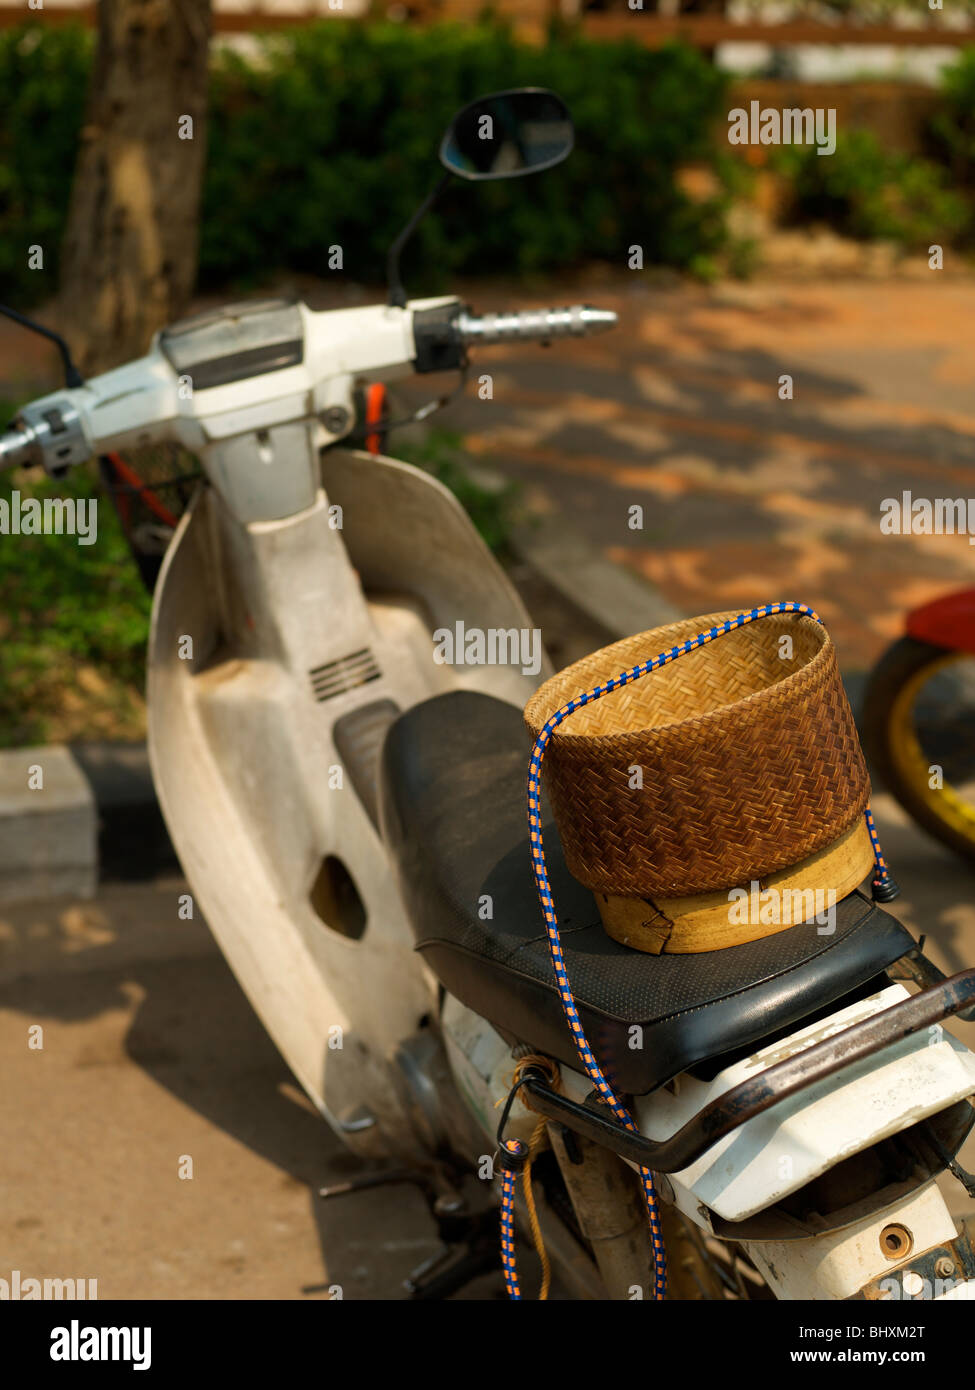 Motorbike with a sticky rice basket strapped to the back Stock Photo